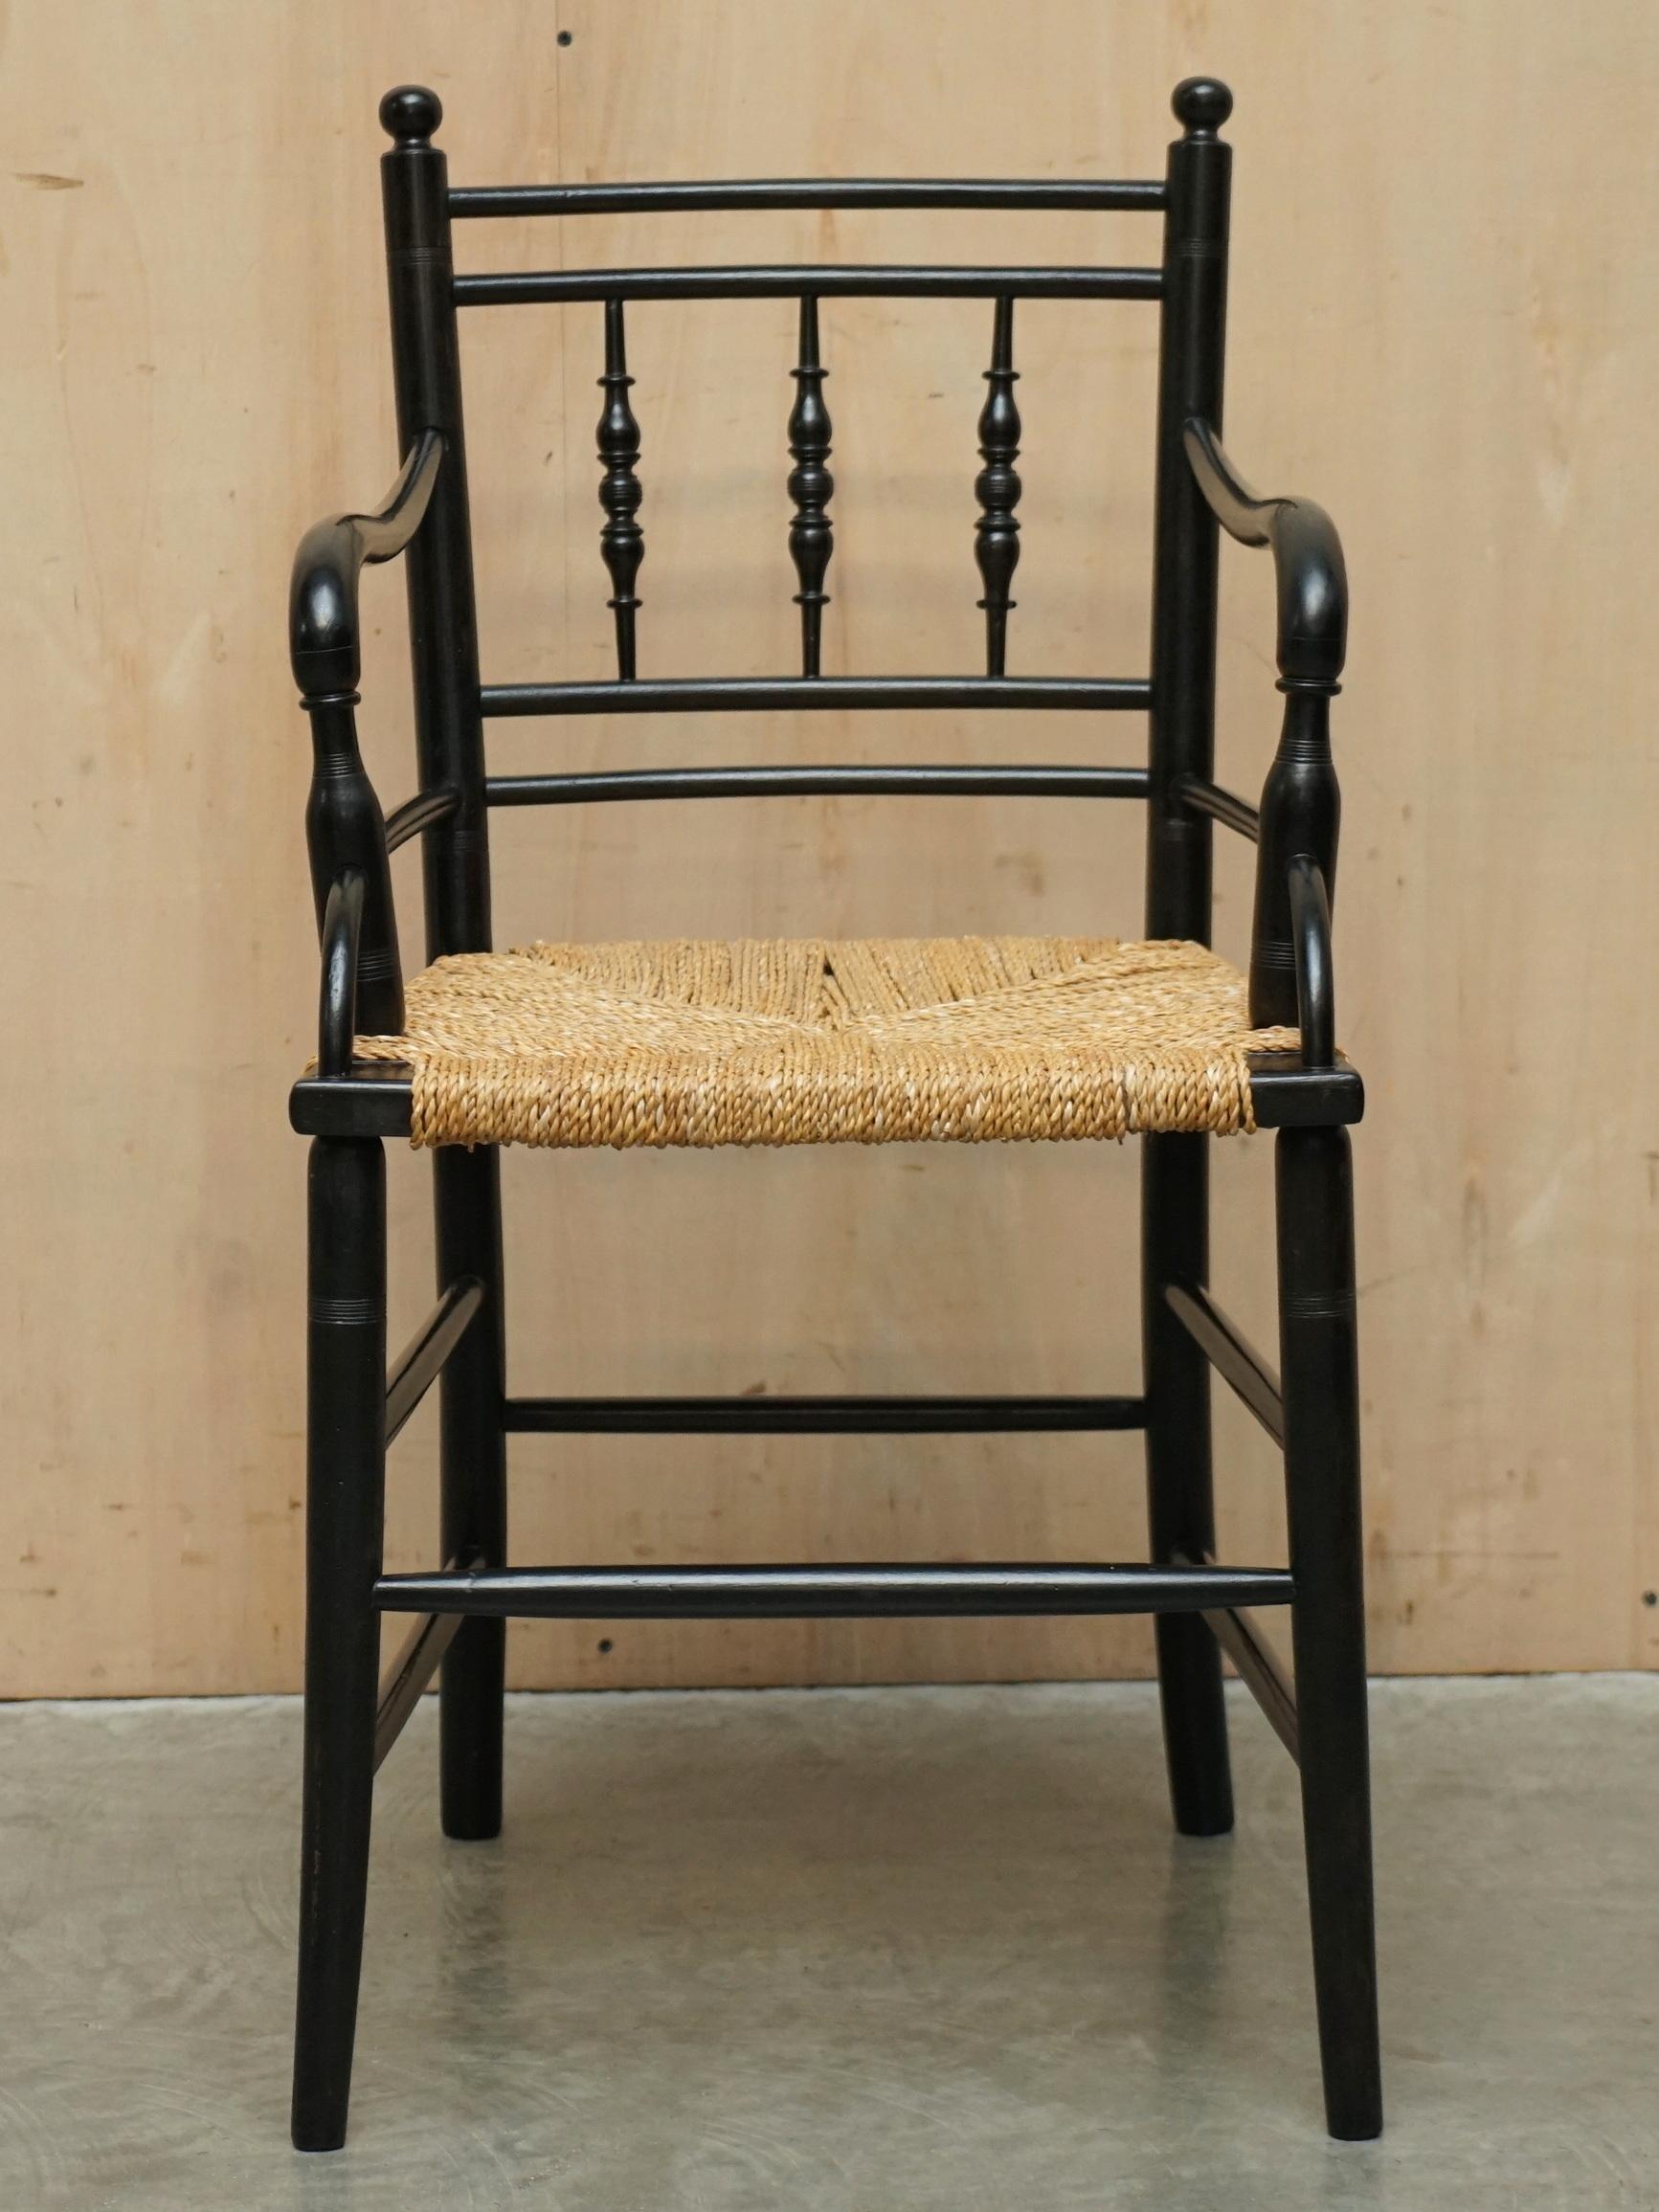 We are delighted to offer for sale this lovely very rare and collectable William Morris Rush seat Sussex armchair with drop front curved arms, circa 1870-1880 as seen in the Victorian and Albert museum

Ownership & Use

William Morris and his